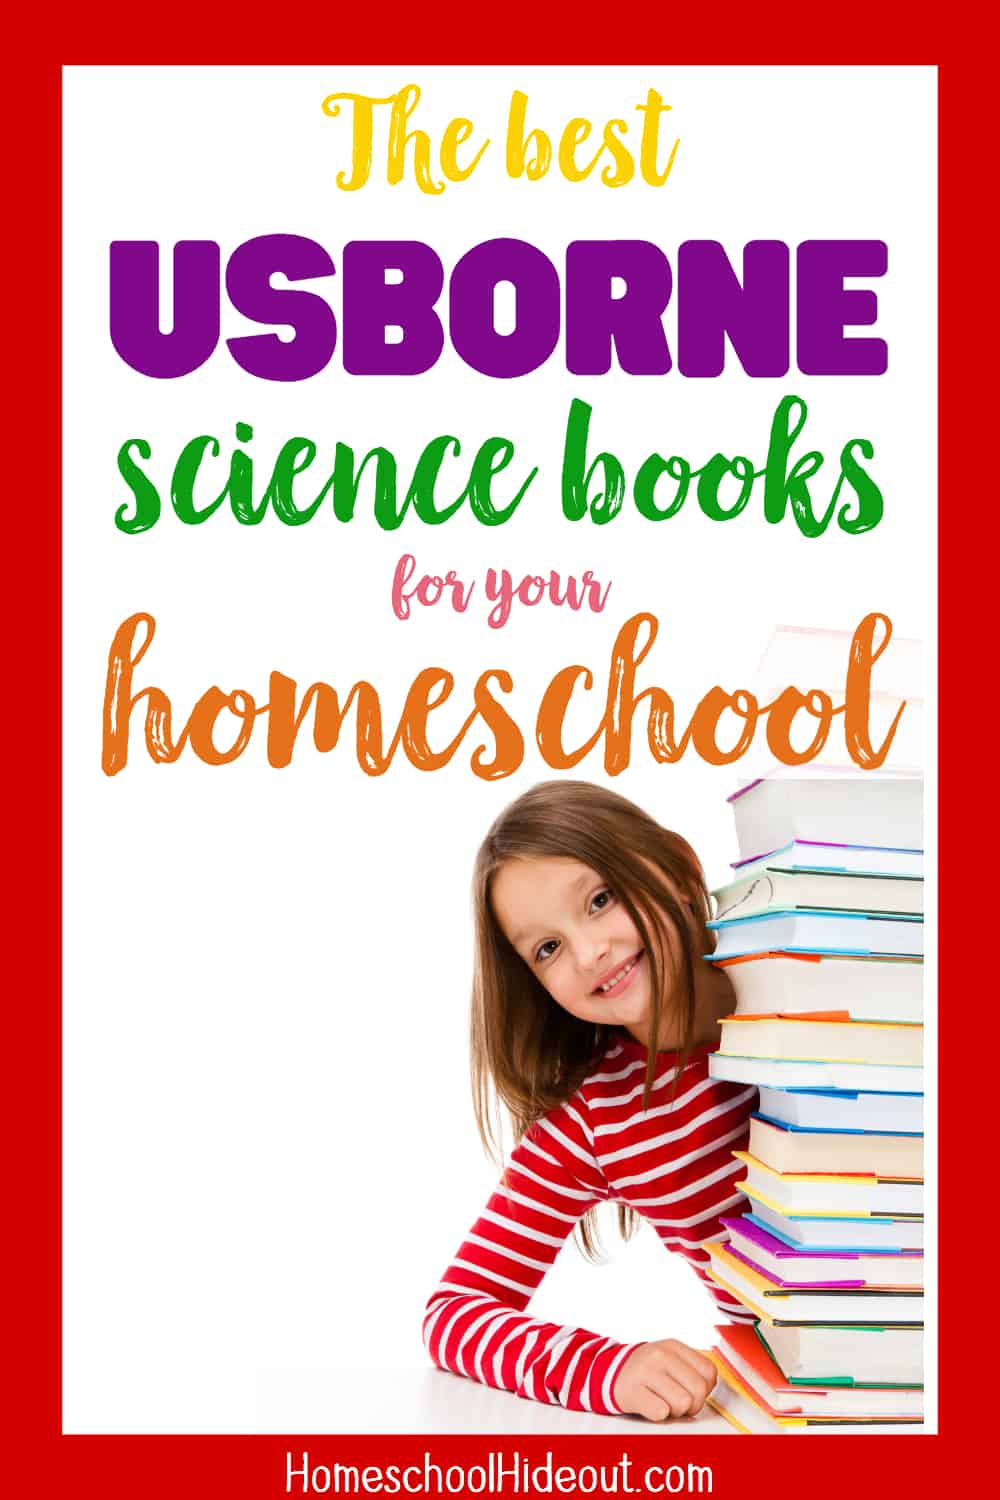 FINALLY! A one-stop-shop for Usborne science books for homeschoolers. Human body, dinosaurs, oceans, animals...this covers EVERYTHING for me!